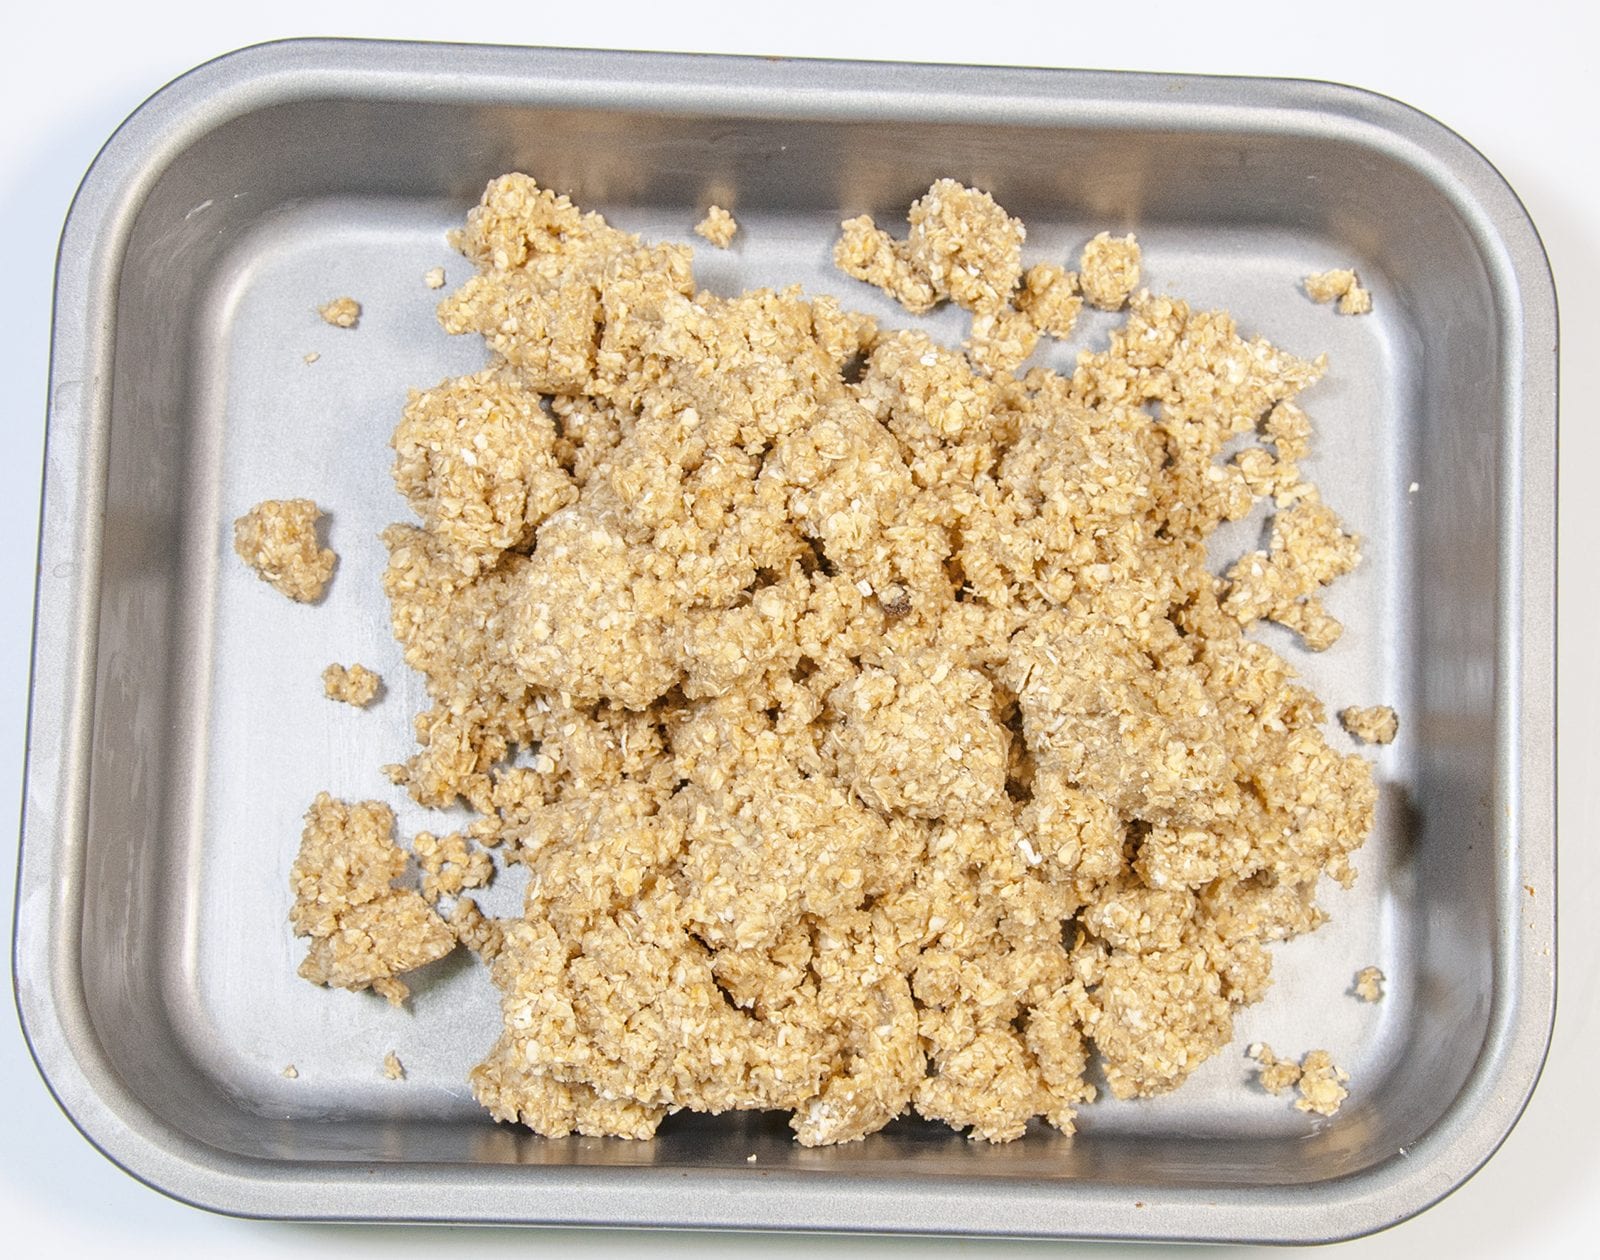 Tip the flapjack mixture into a baking tray | https://theyumyumclub.com/2019/06/01/extra-soft-and-chewy-flapjacks/